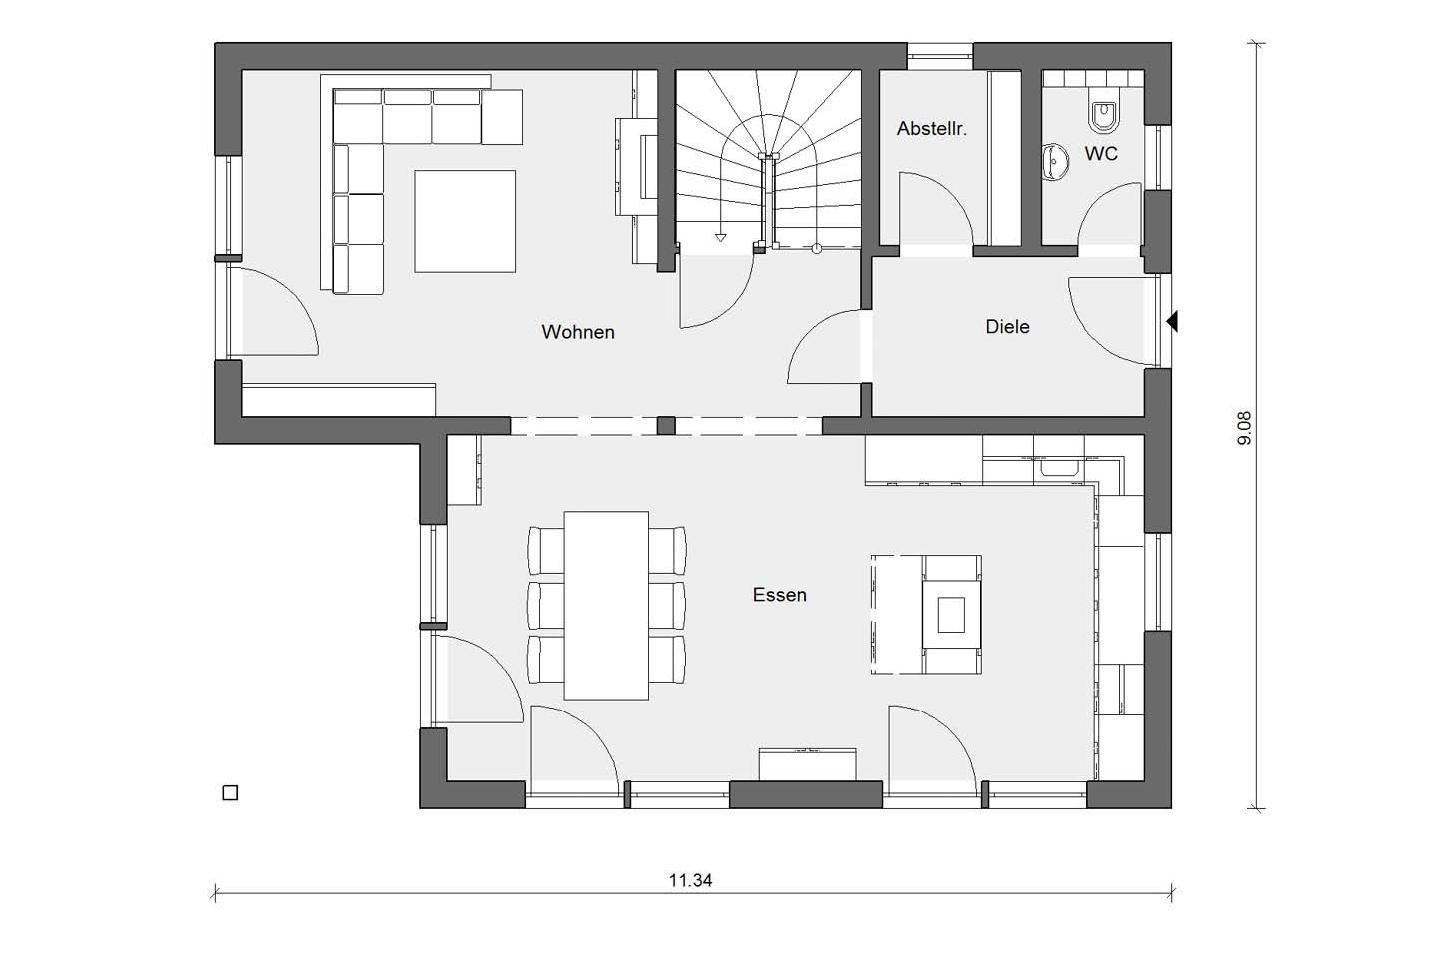 Ground floor layout E 15-153.2 Detached house with double garage